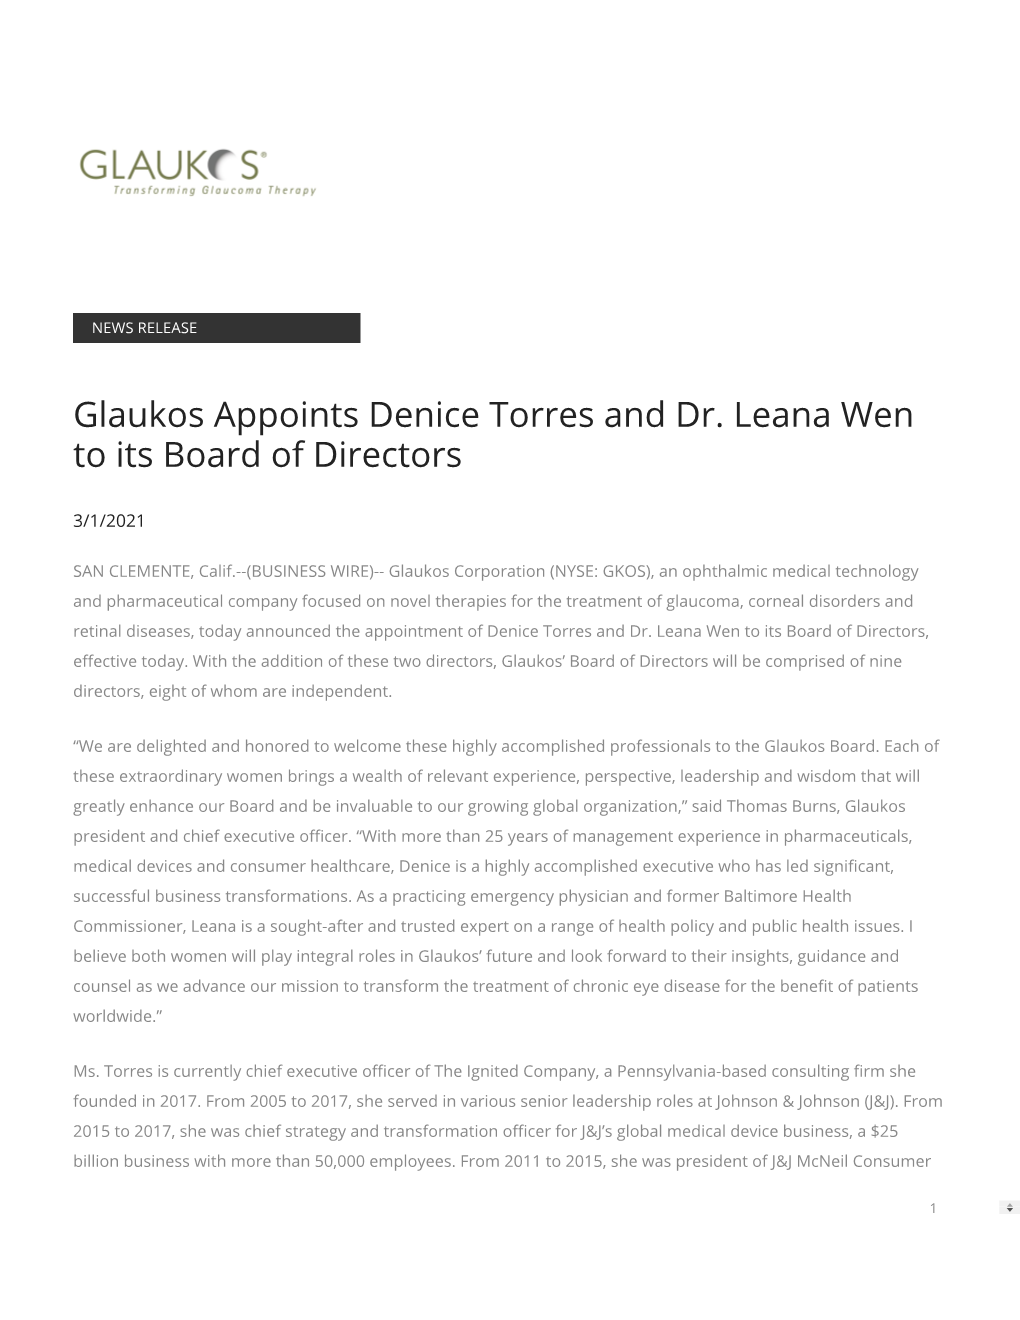 Glaukos Appoints Denice Torres and Dr. Leana Wen to Its Board of Directors